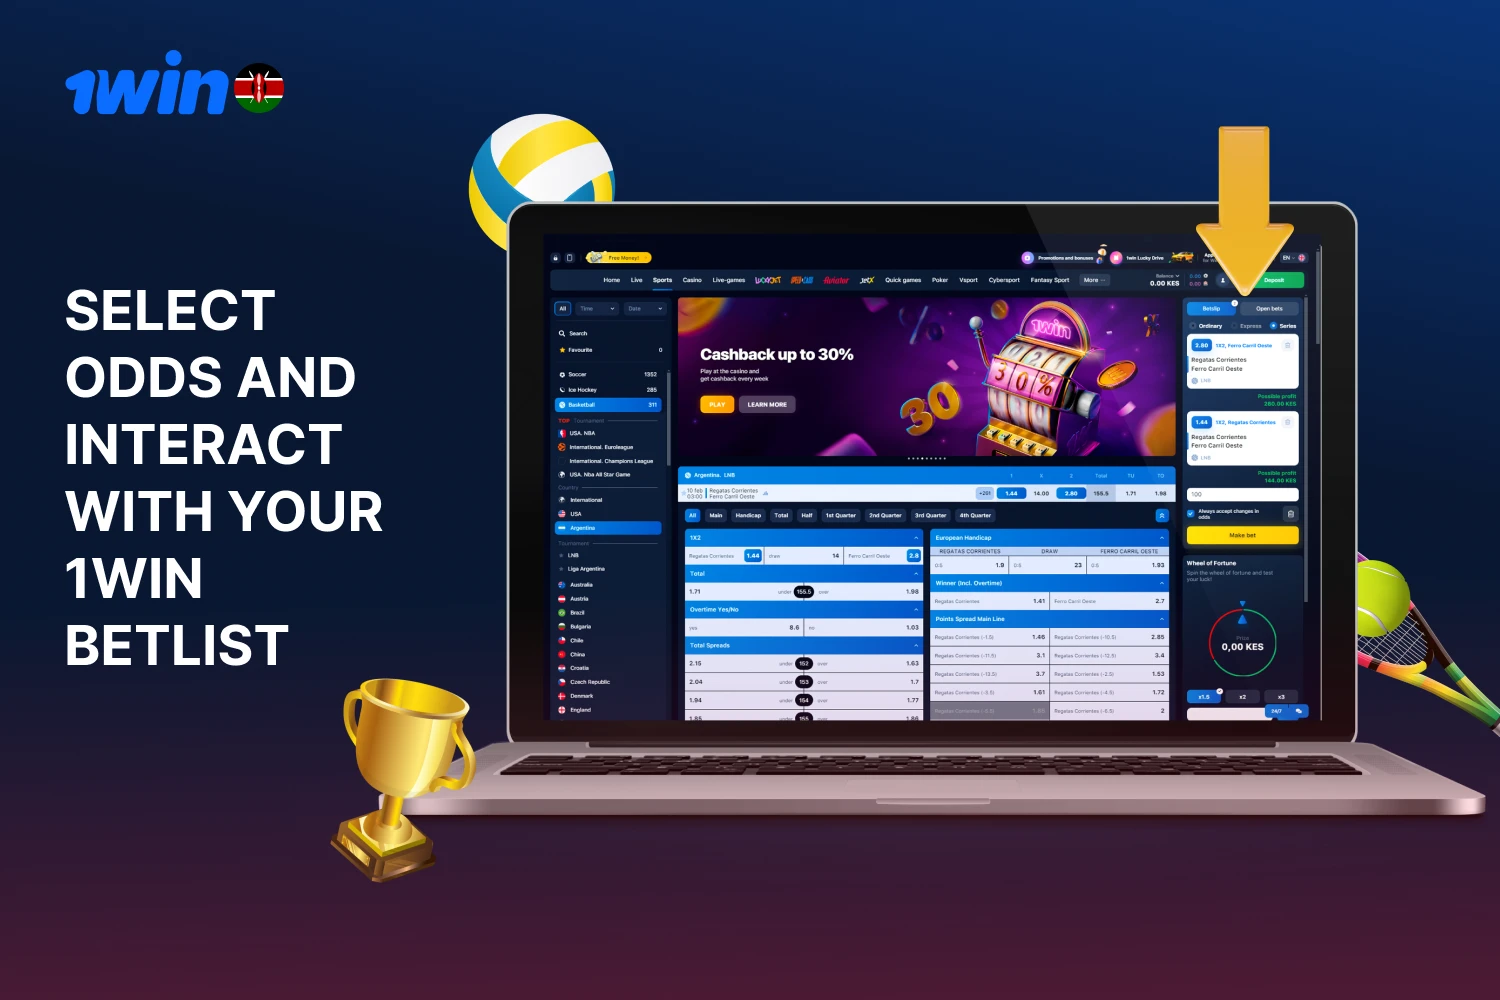 Select odds and interact with your 1win betlist